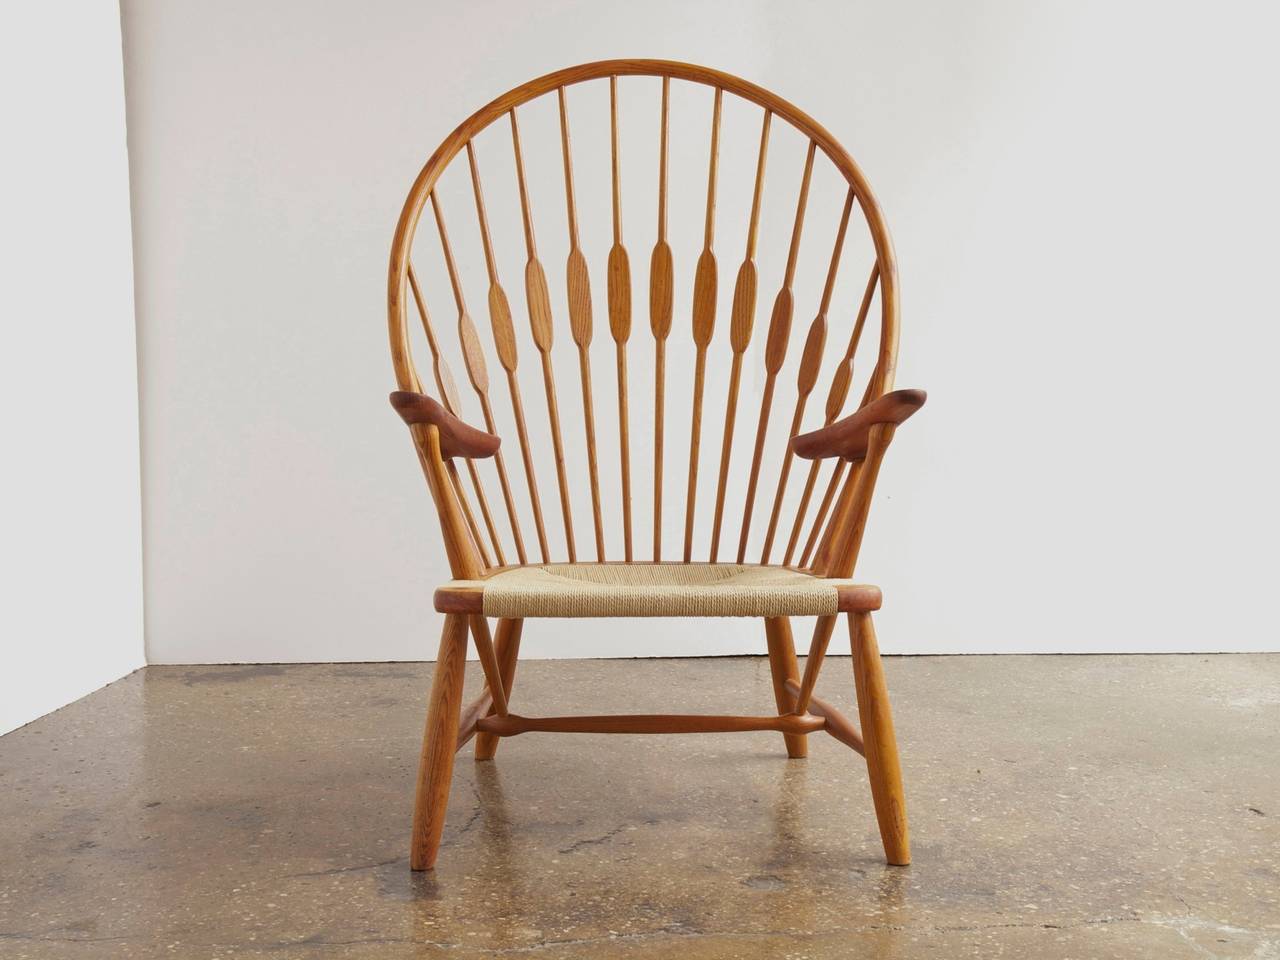 Hans J. Wegner's iconic take on the windsor chair, designed in 1947 and produced by Johannes Hansen. A wonderful example for the Danish modern collector. The chair is in excellent restored condition and has a new woven paper cord seat. Stamped on